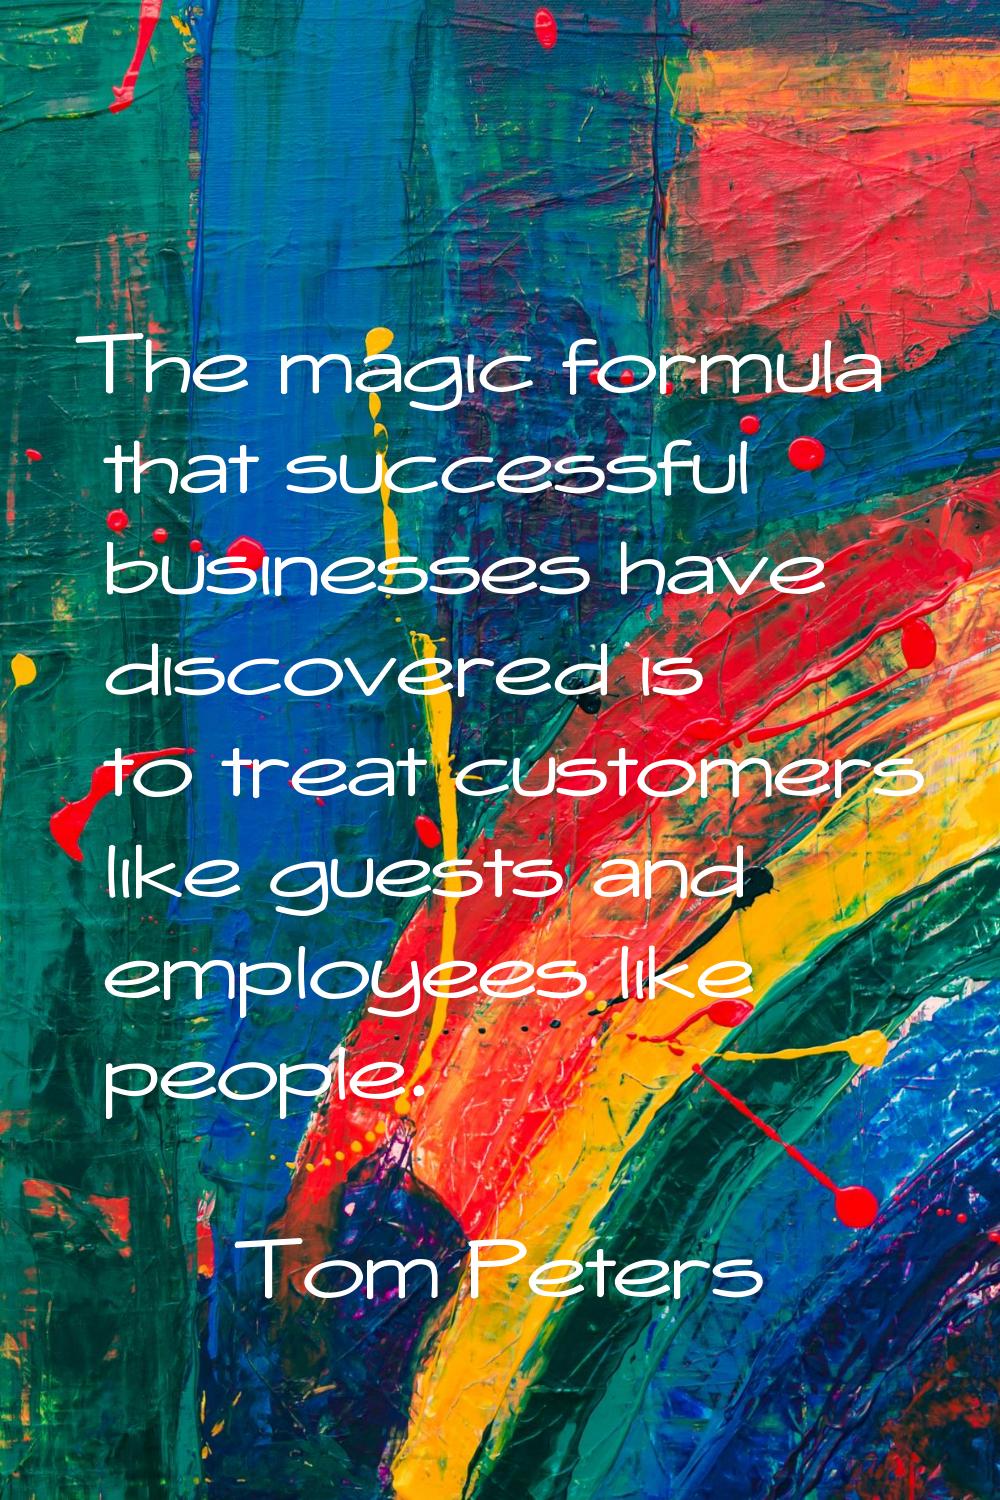 The magic formula that successful businesses have discovered is to treat customers like guests and 